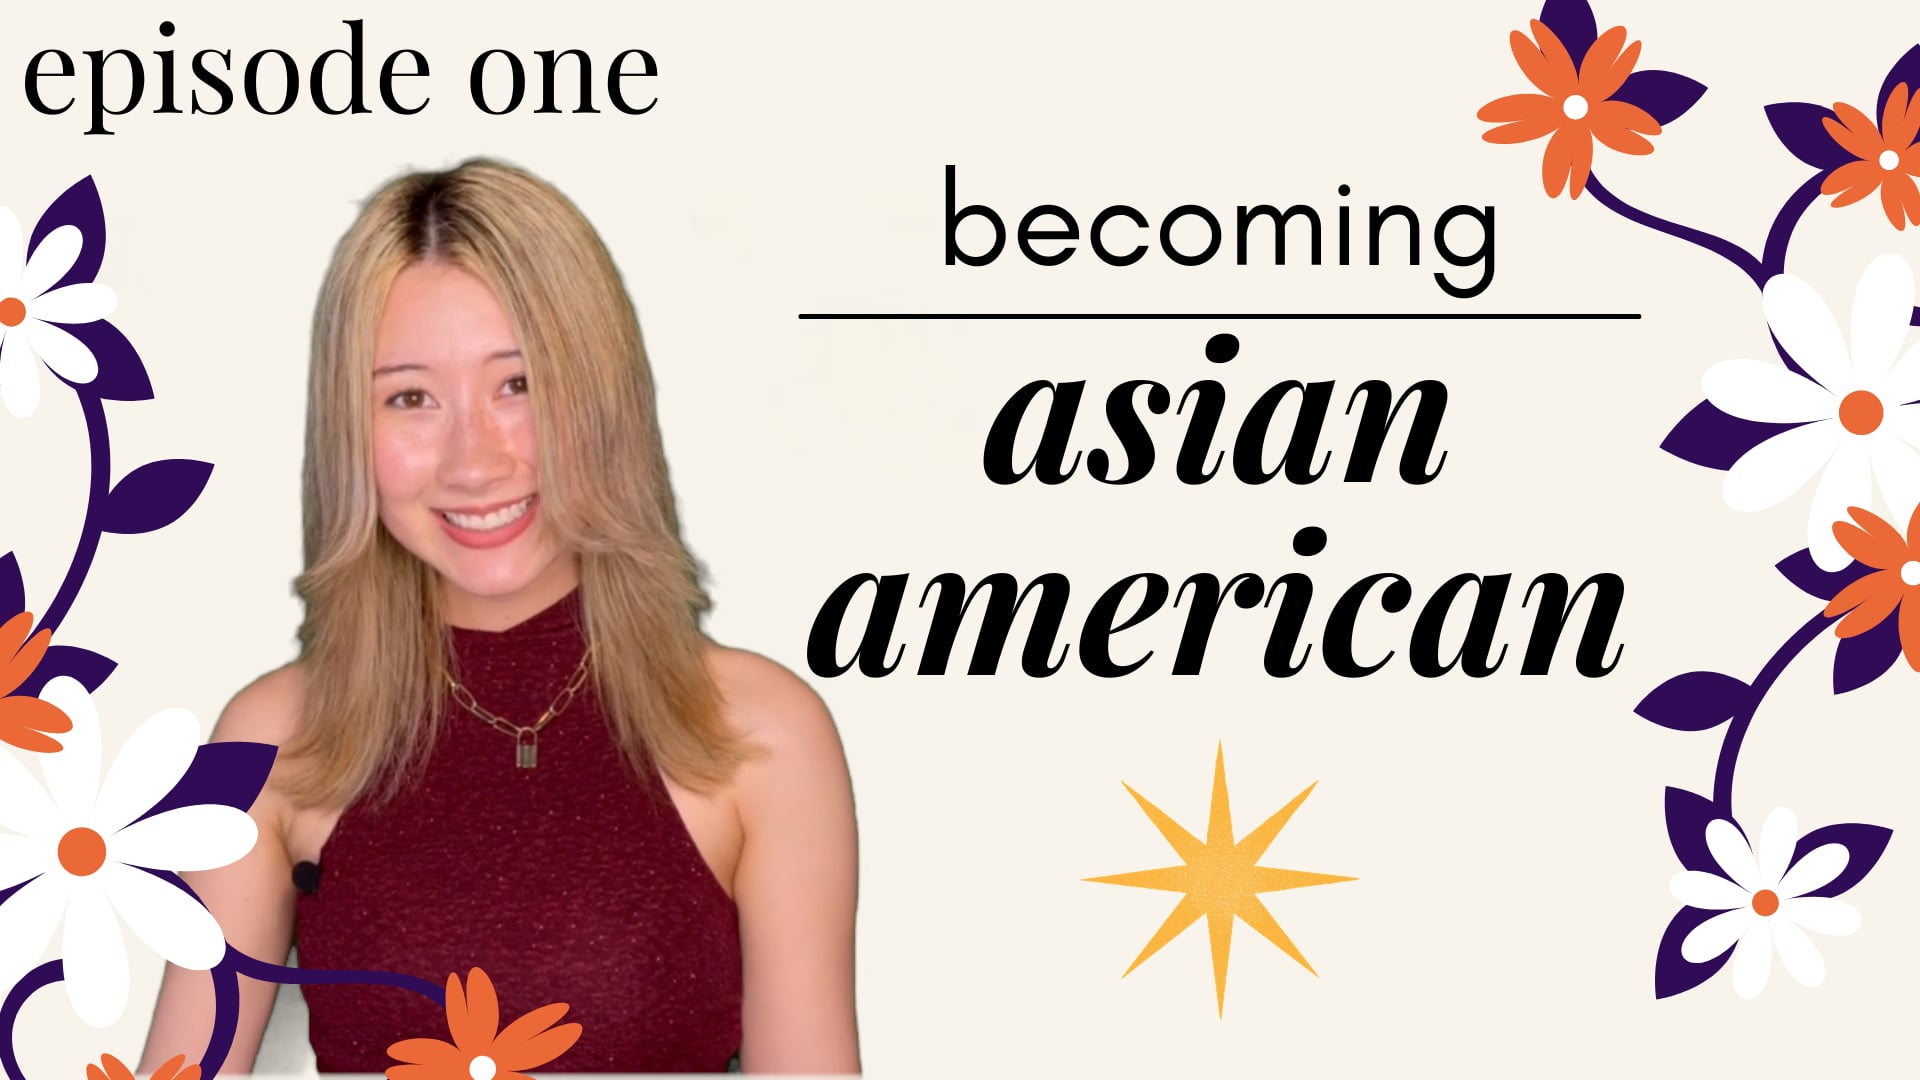 Starring Diversity - Episode 1 (Becoming Asian American)